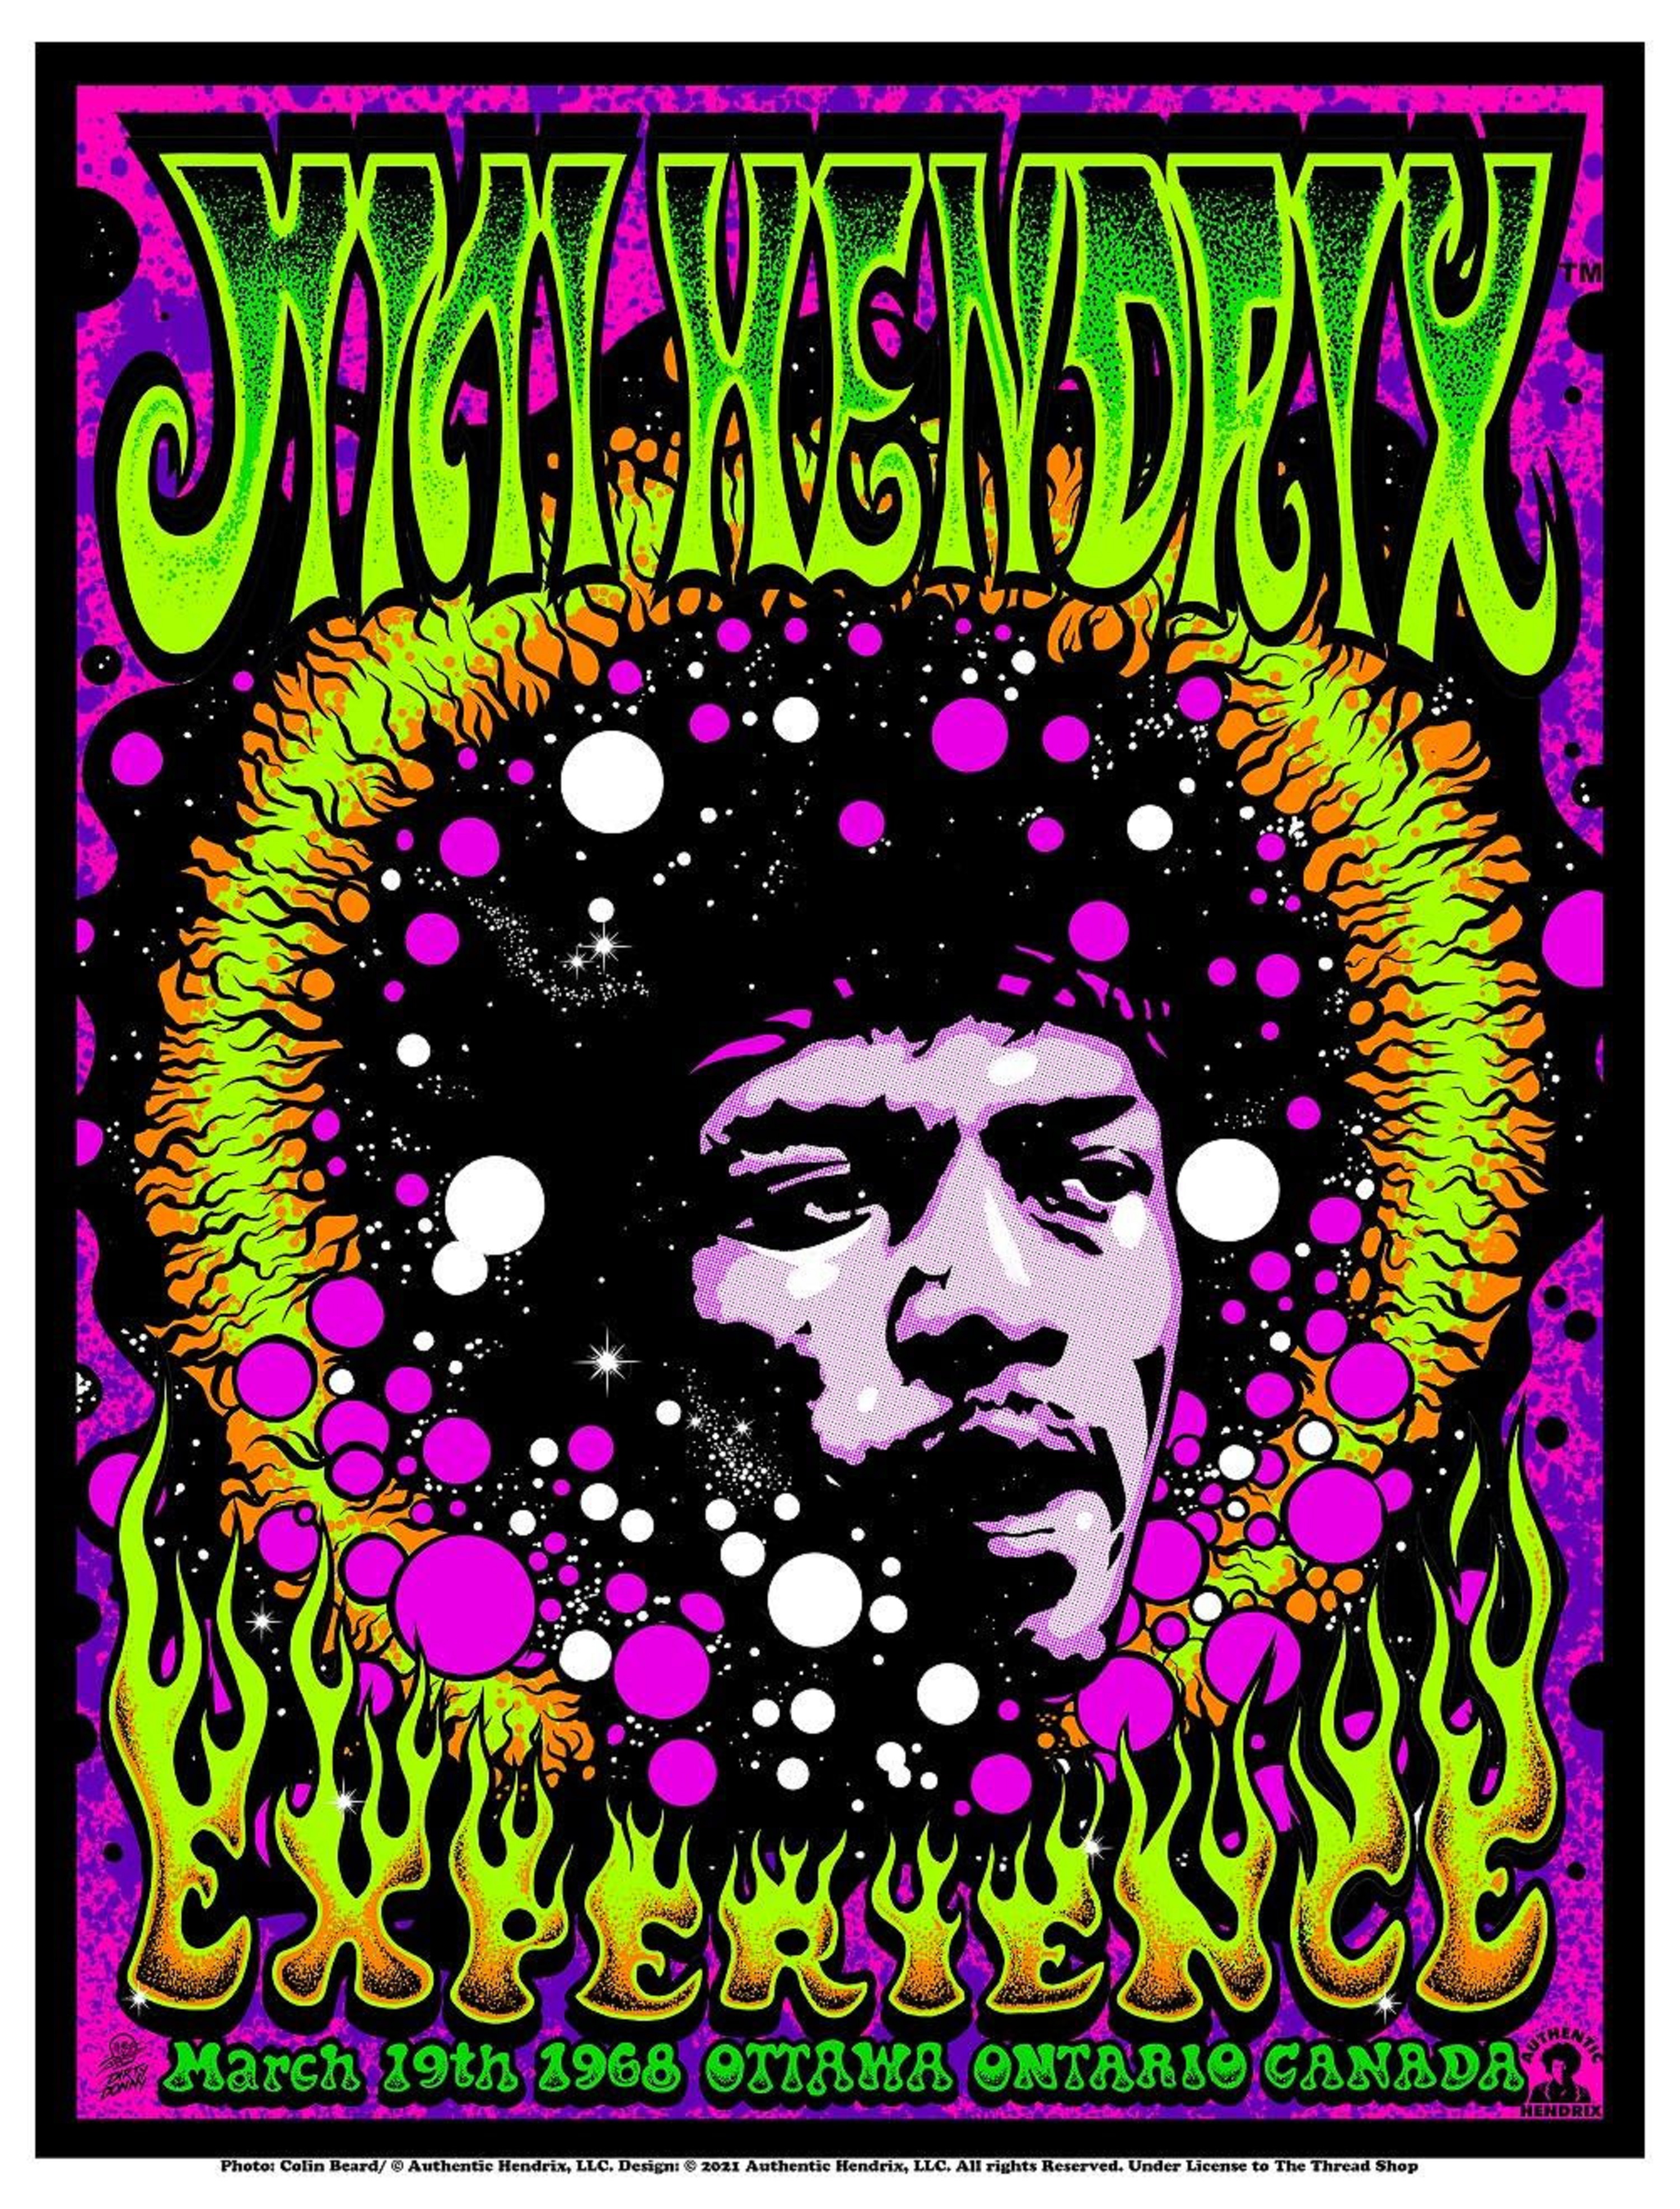 Germany Jimi Hendrix Klaus Voormann 1997 Signed Limited Edition Poster 